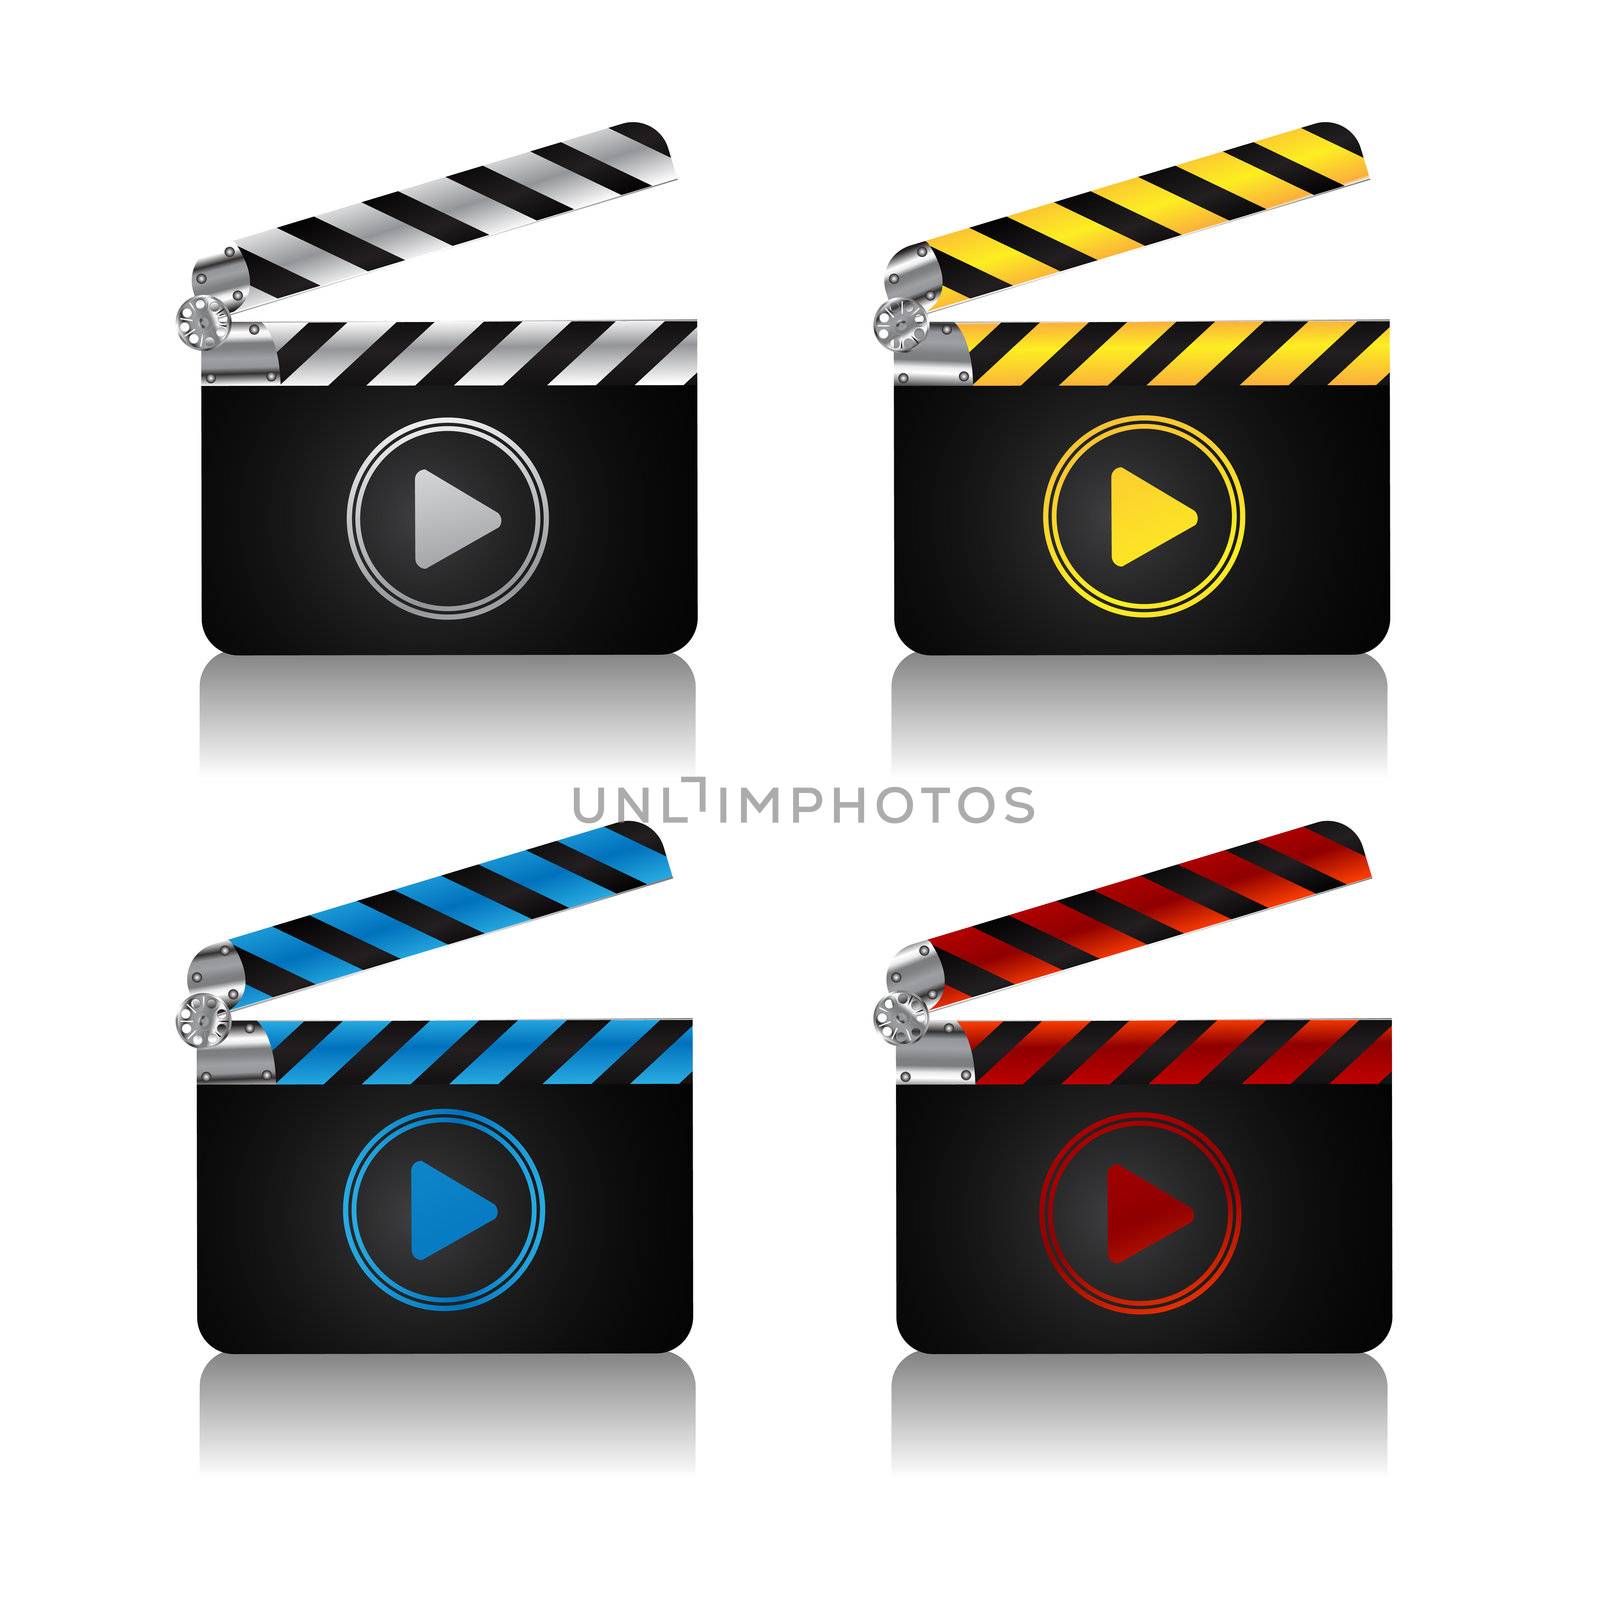 Movie clapper board icons by Lirch